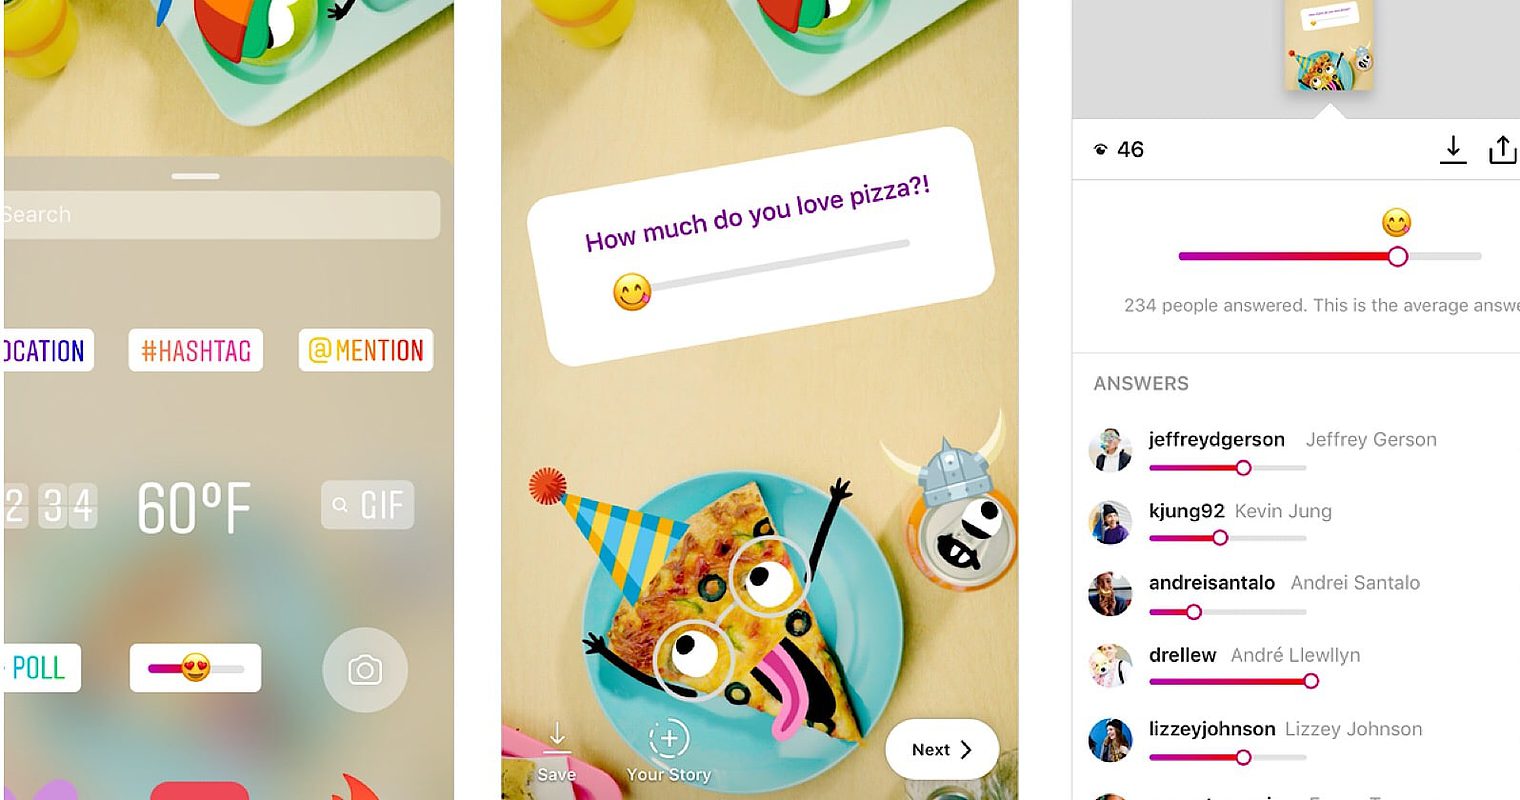 Instagram’s New Emoji Sliders Can Gauge Your Audience’s Opinion on Topics